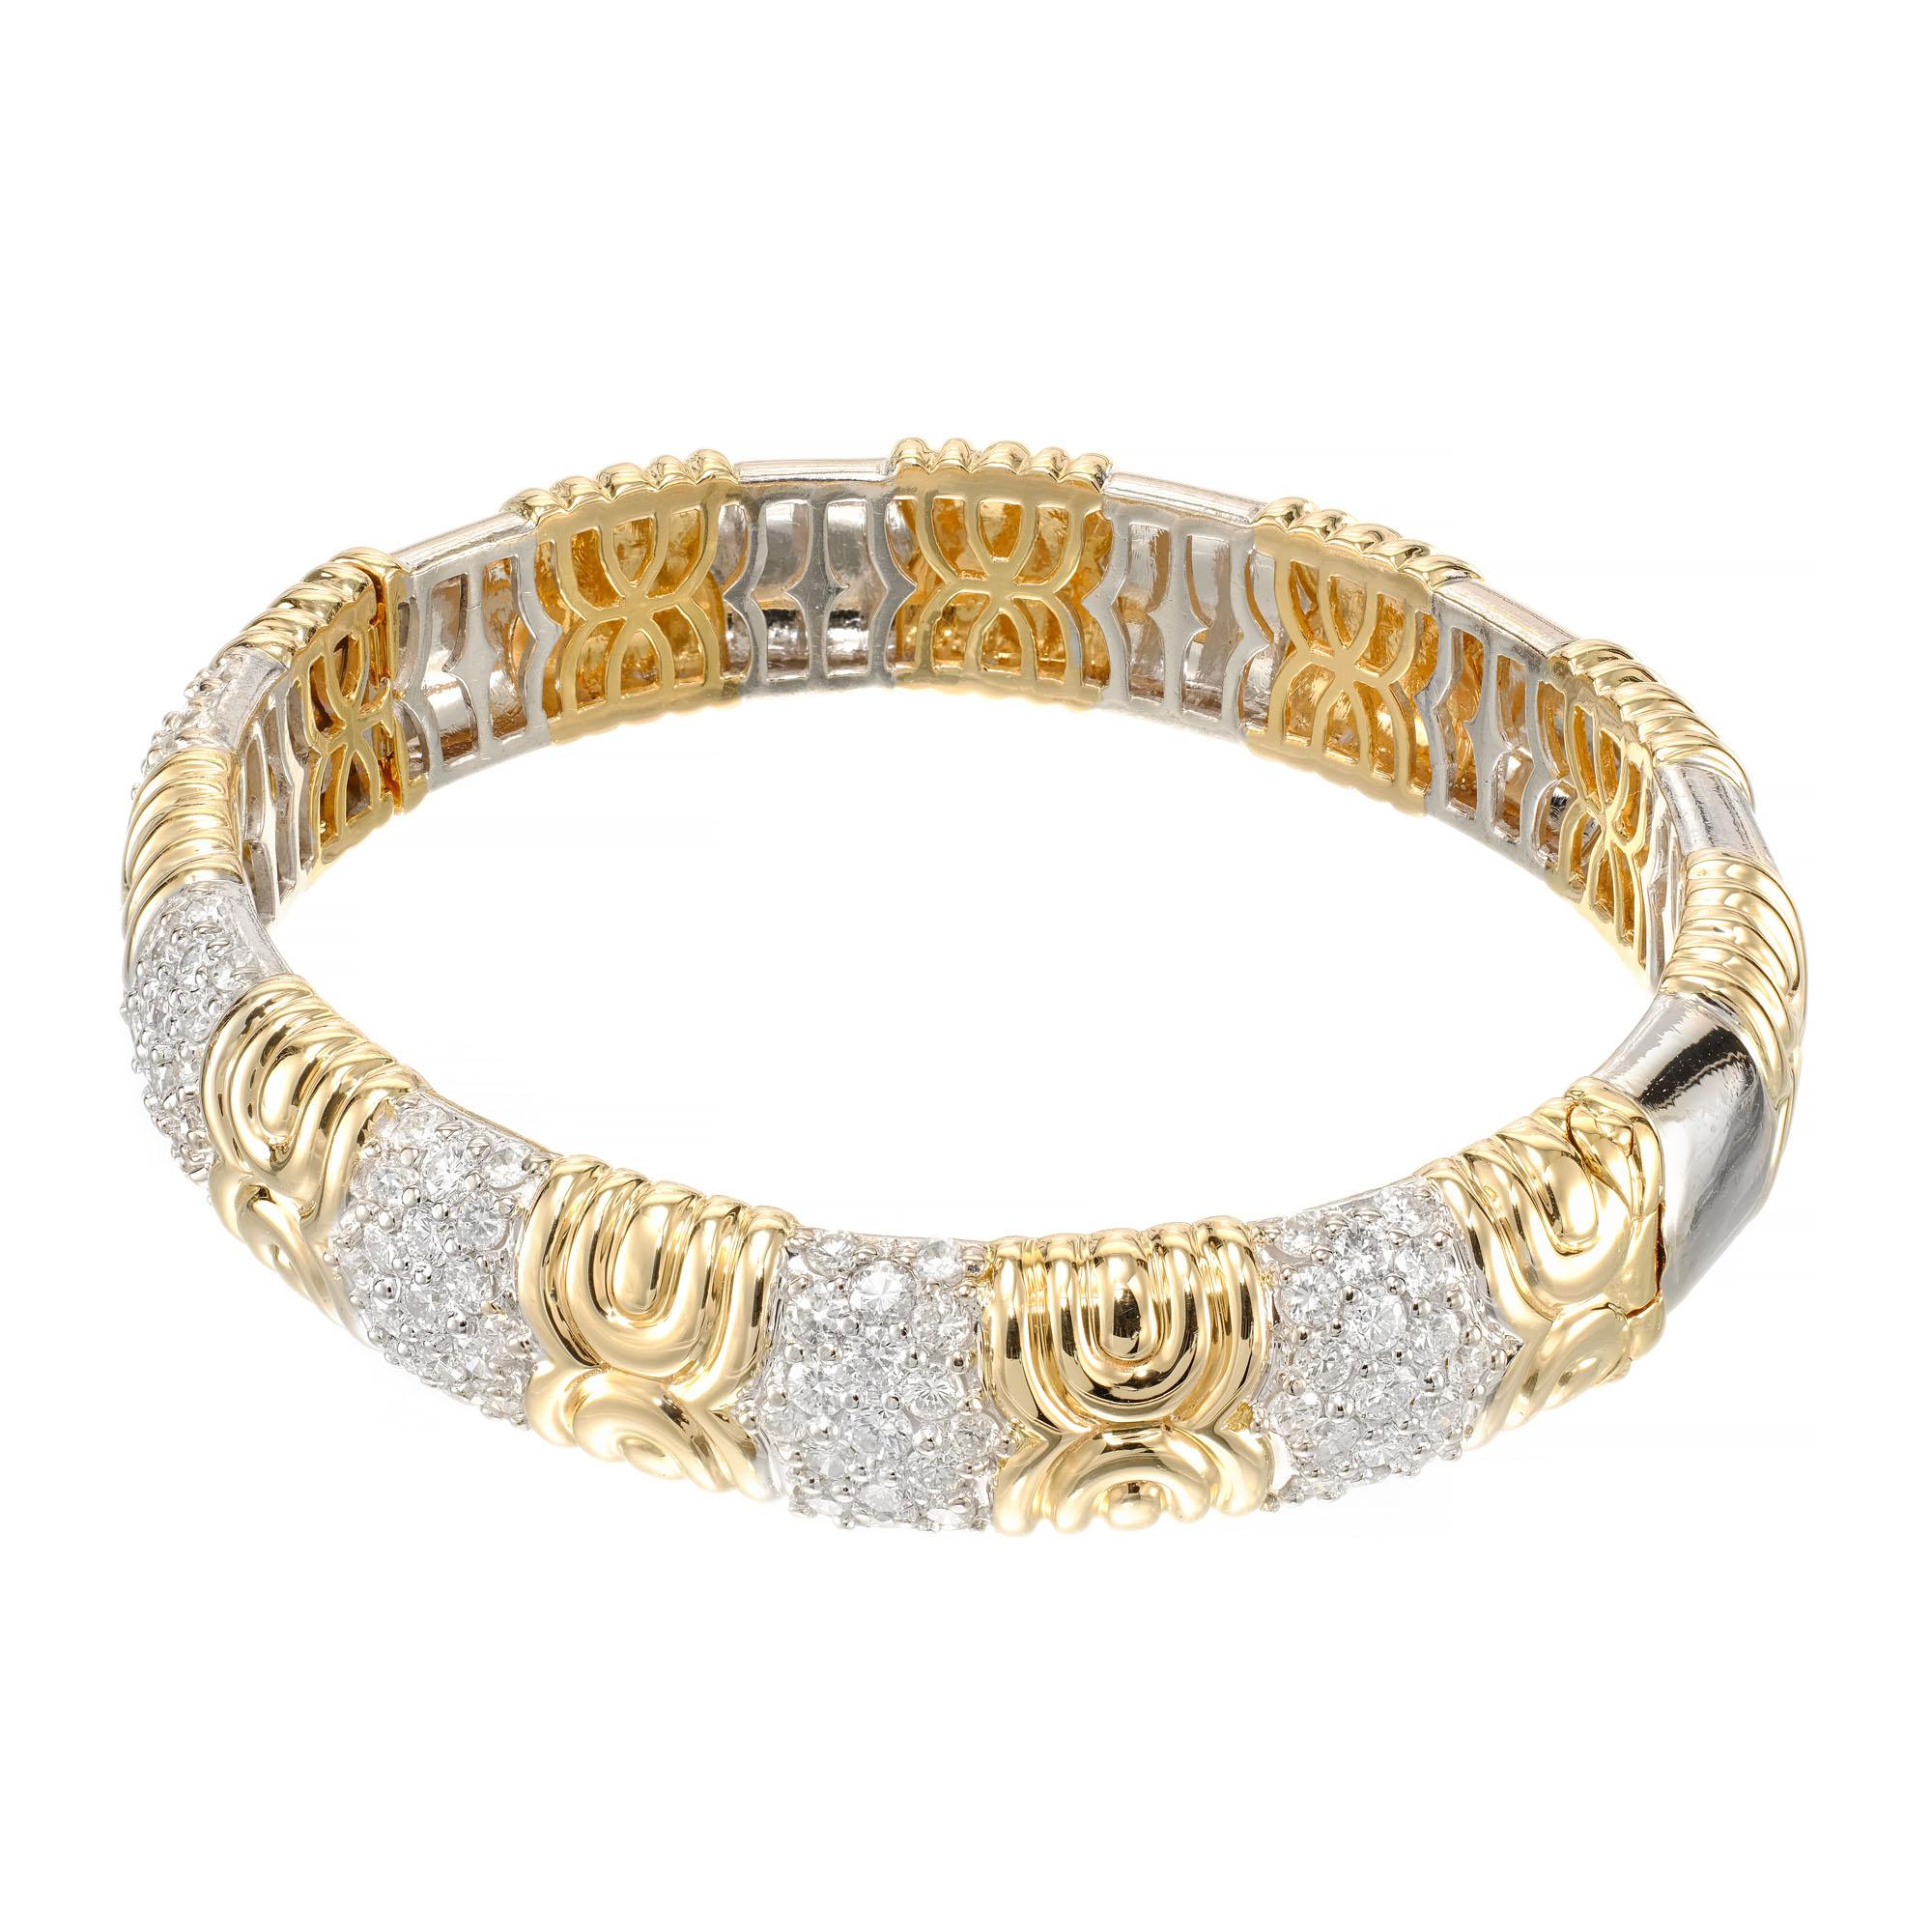 18k yellow and white gold bangle bracelet accented with 95 round brilliant cut diamonds.

95 round brilliant cut diamonds, G-H VS approx. 3.33cts
18k yellow gold 
18k white gold 
Stamped: 750
50.3 grams
Width: 12.6mm 
Thickness/depth: 5.7mm
Inside